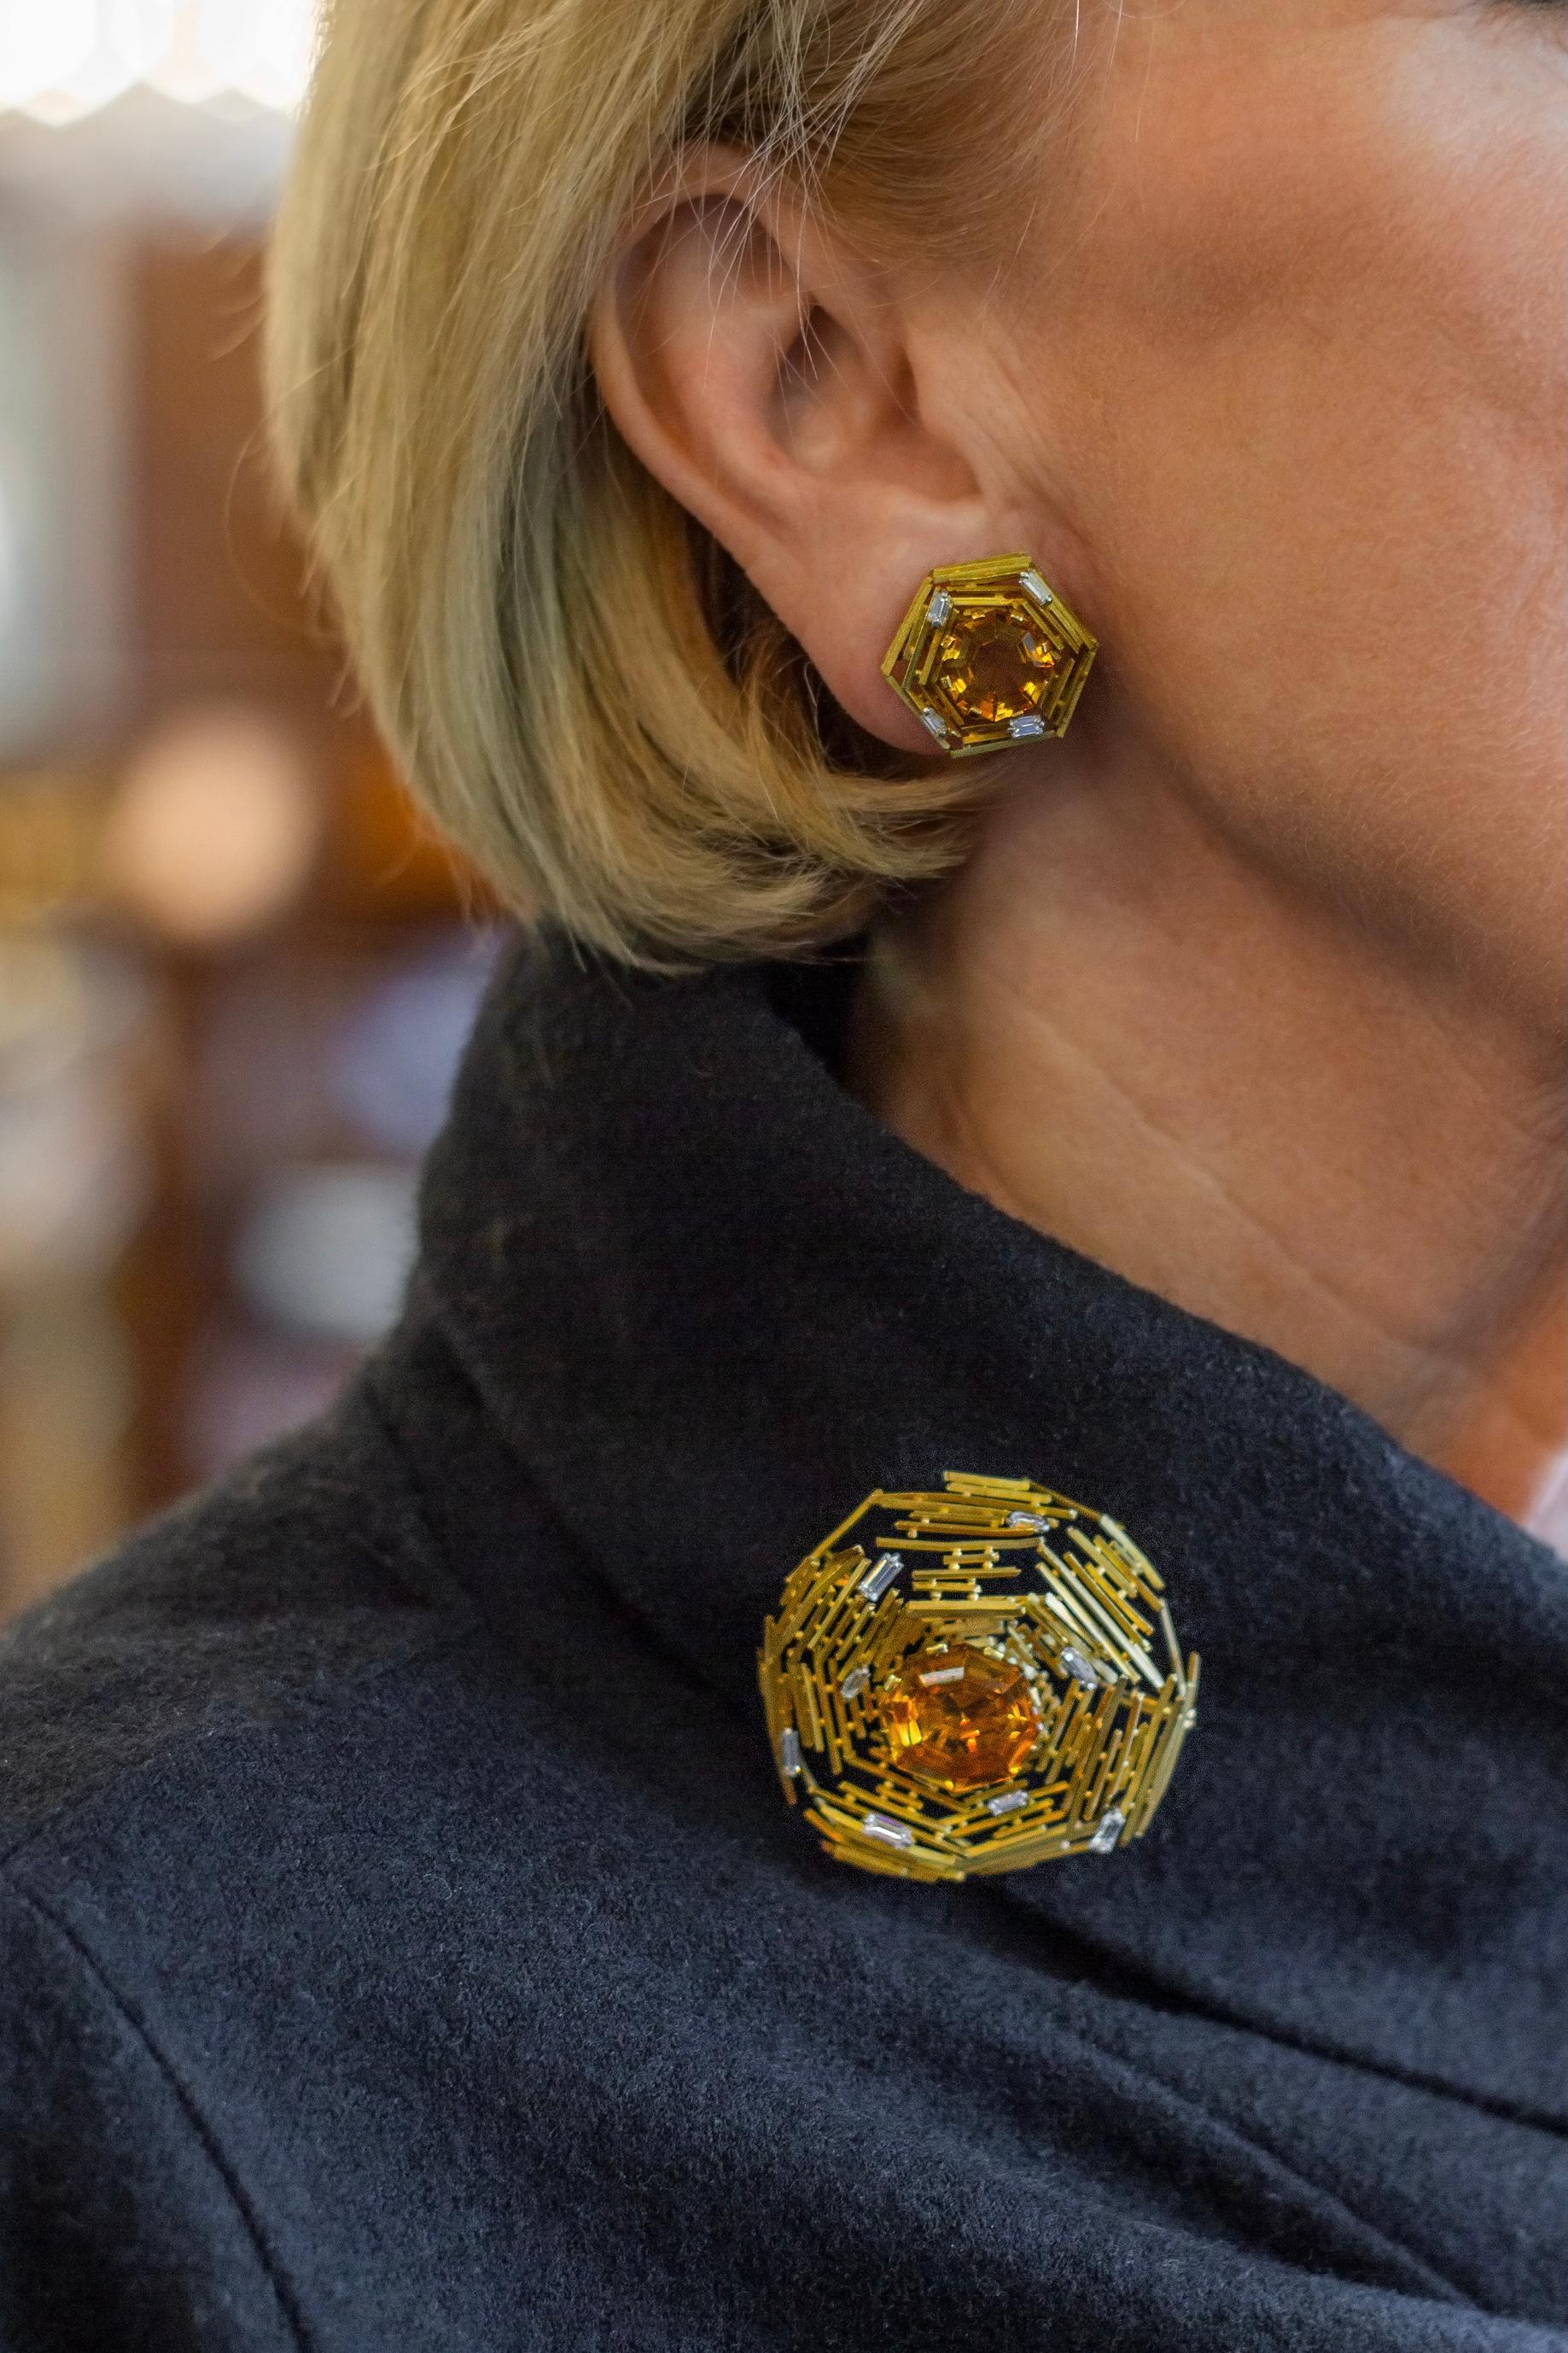 The most incredible gold brooch by perhaps the most famous modernist jeweller to have lived, Andrew Grima. Formed from 18 karat gold this 'nest' style brooch is crafted with satin-finished gold bars which interconnect, centring on an octagonal